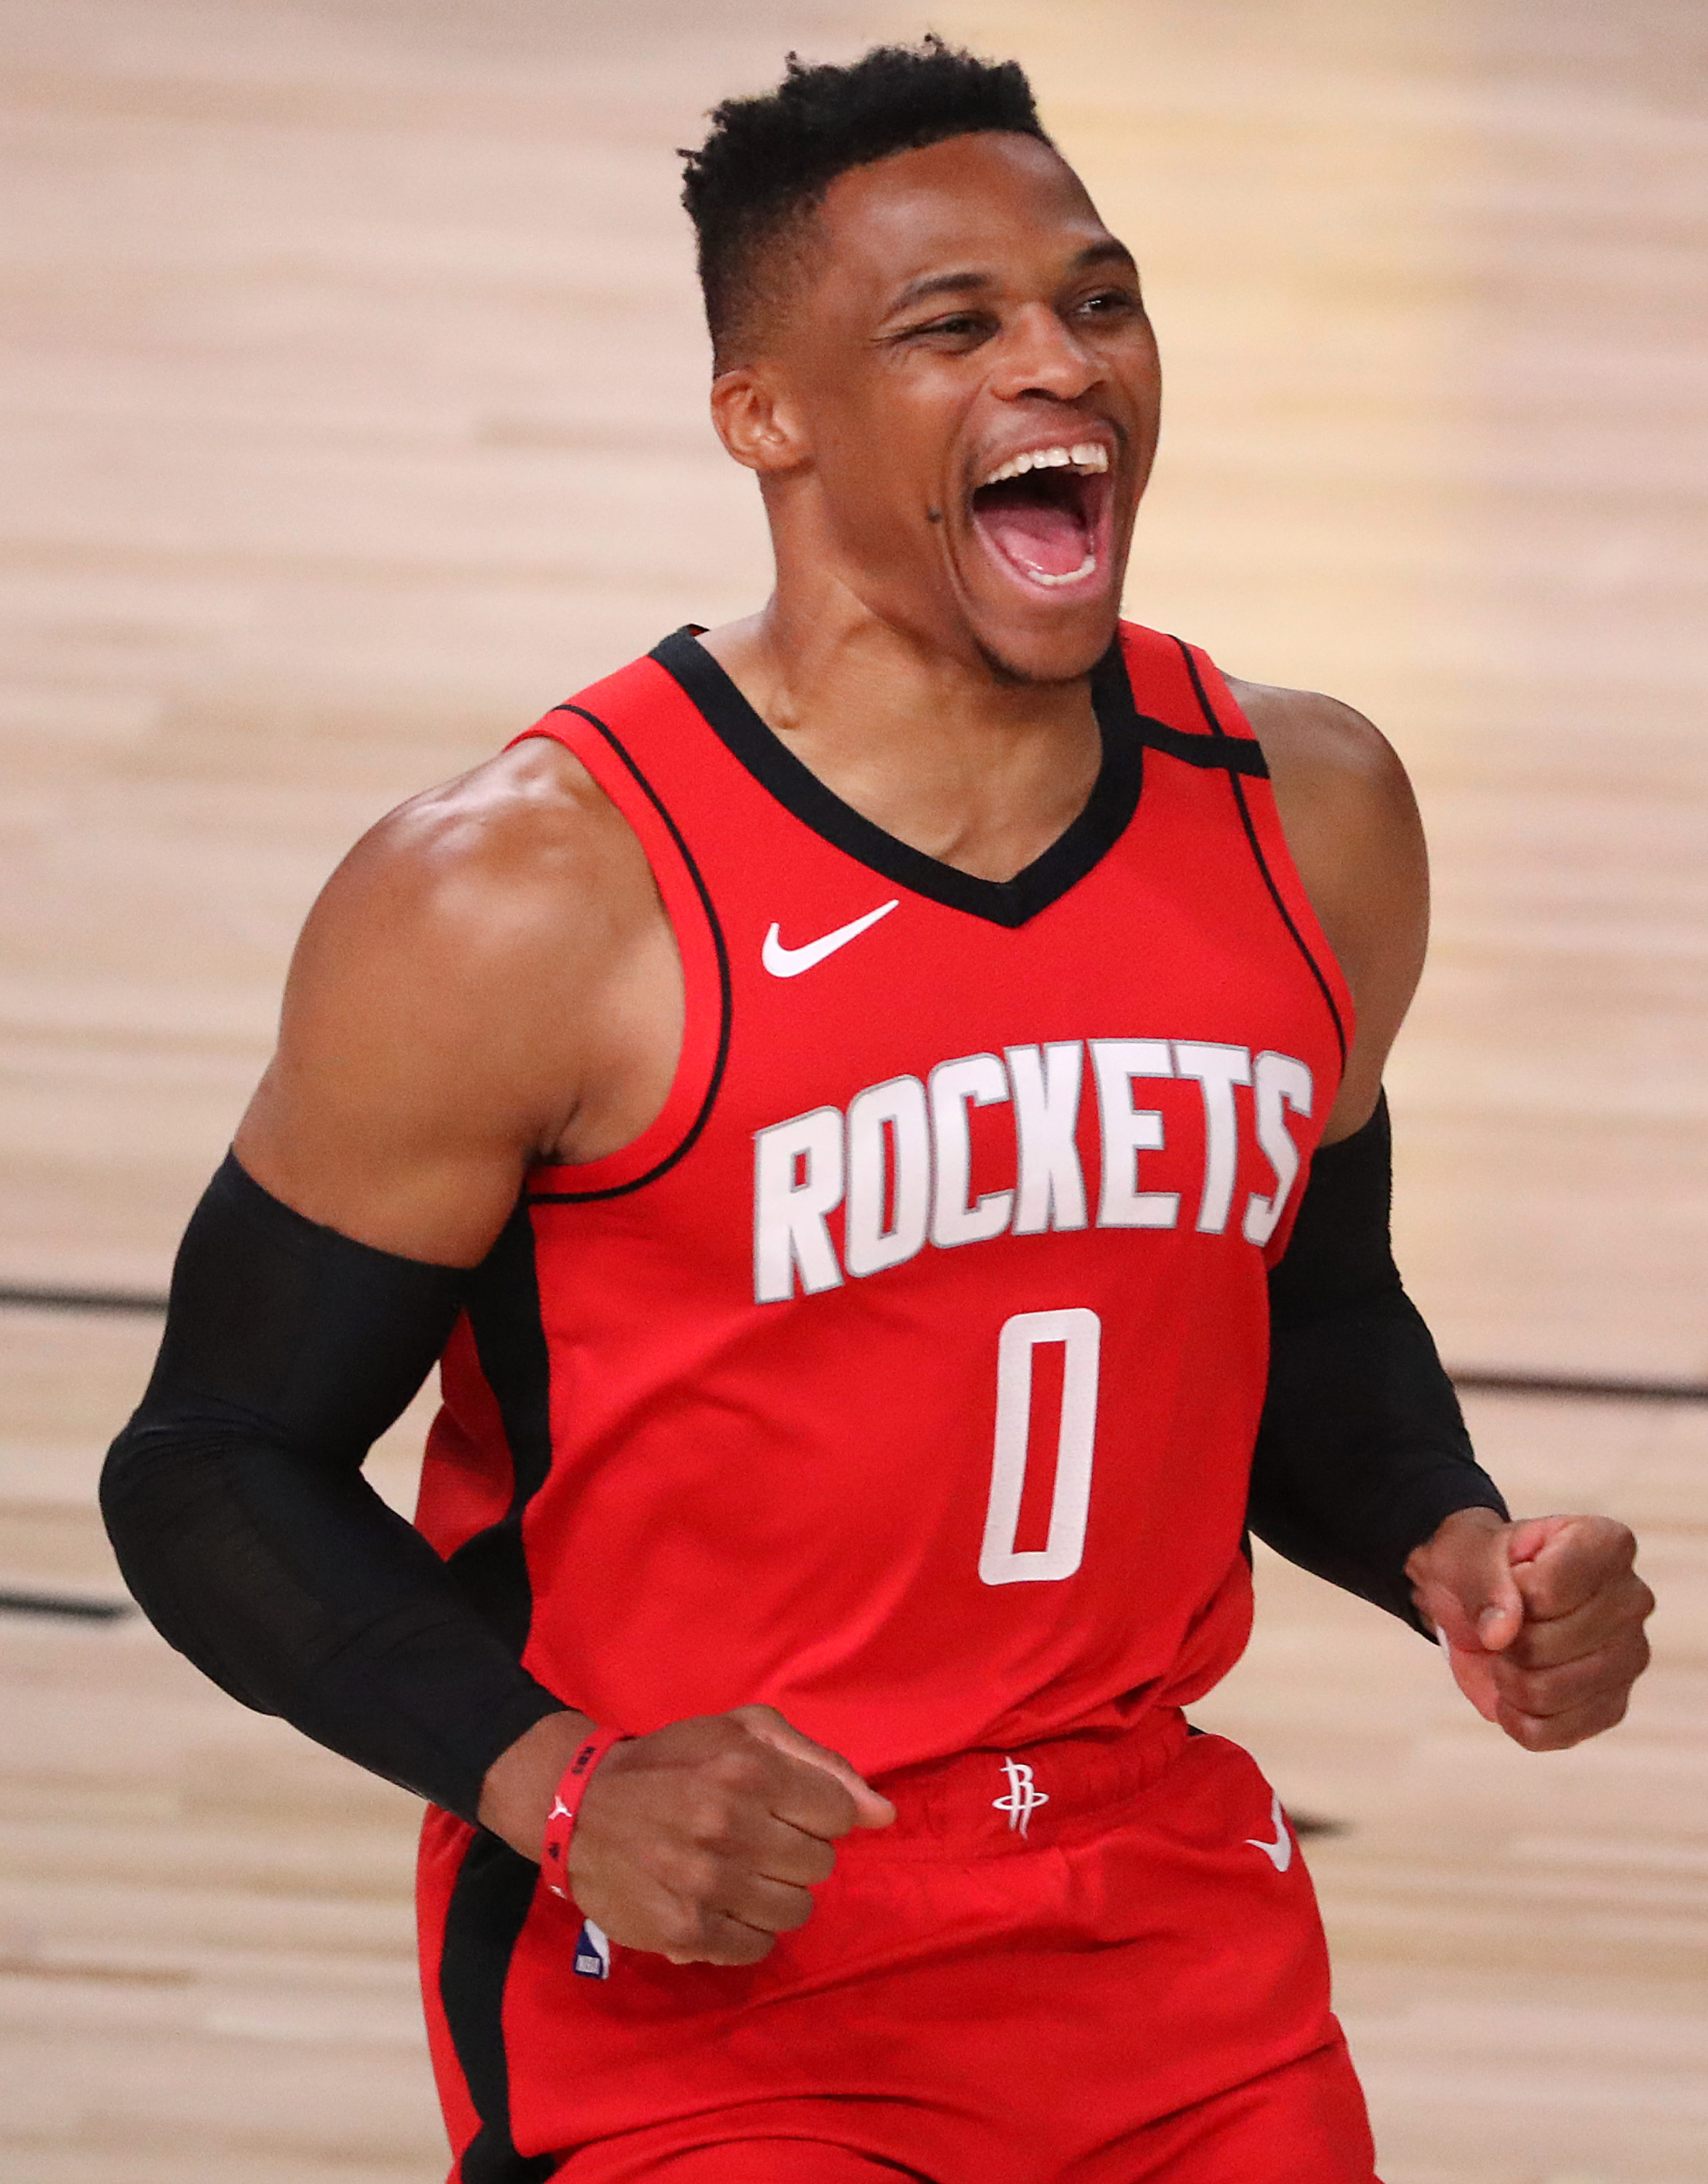 LAKE BUENA VISTA, FLORIDA - SEPTEMBER 10: Russell Westbrook #0 of the Houston Rockets reacts prior to the start of the game against the Los Angeles Lakers in Game Four of the Western Conference Second Round during the 2020 NBA Playoffs at AdventHealth Arena at the ESPN Wide World Of Sports Complex on September 10, 2020 in Lake Buena Vista, Florida. NOTE TO USER: Michael Reaves/Getty Images